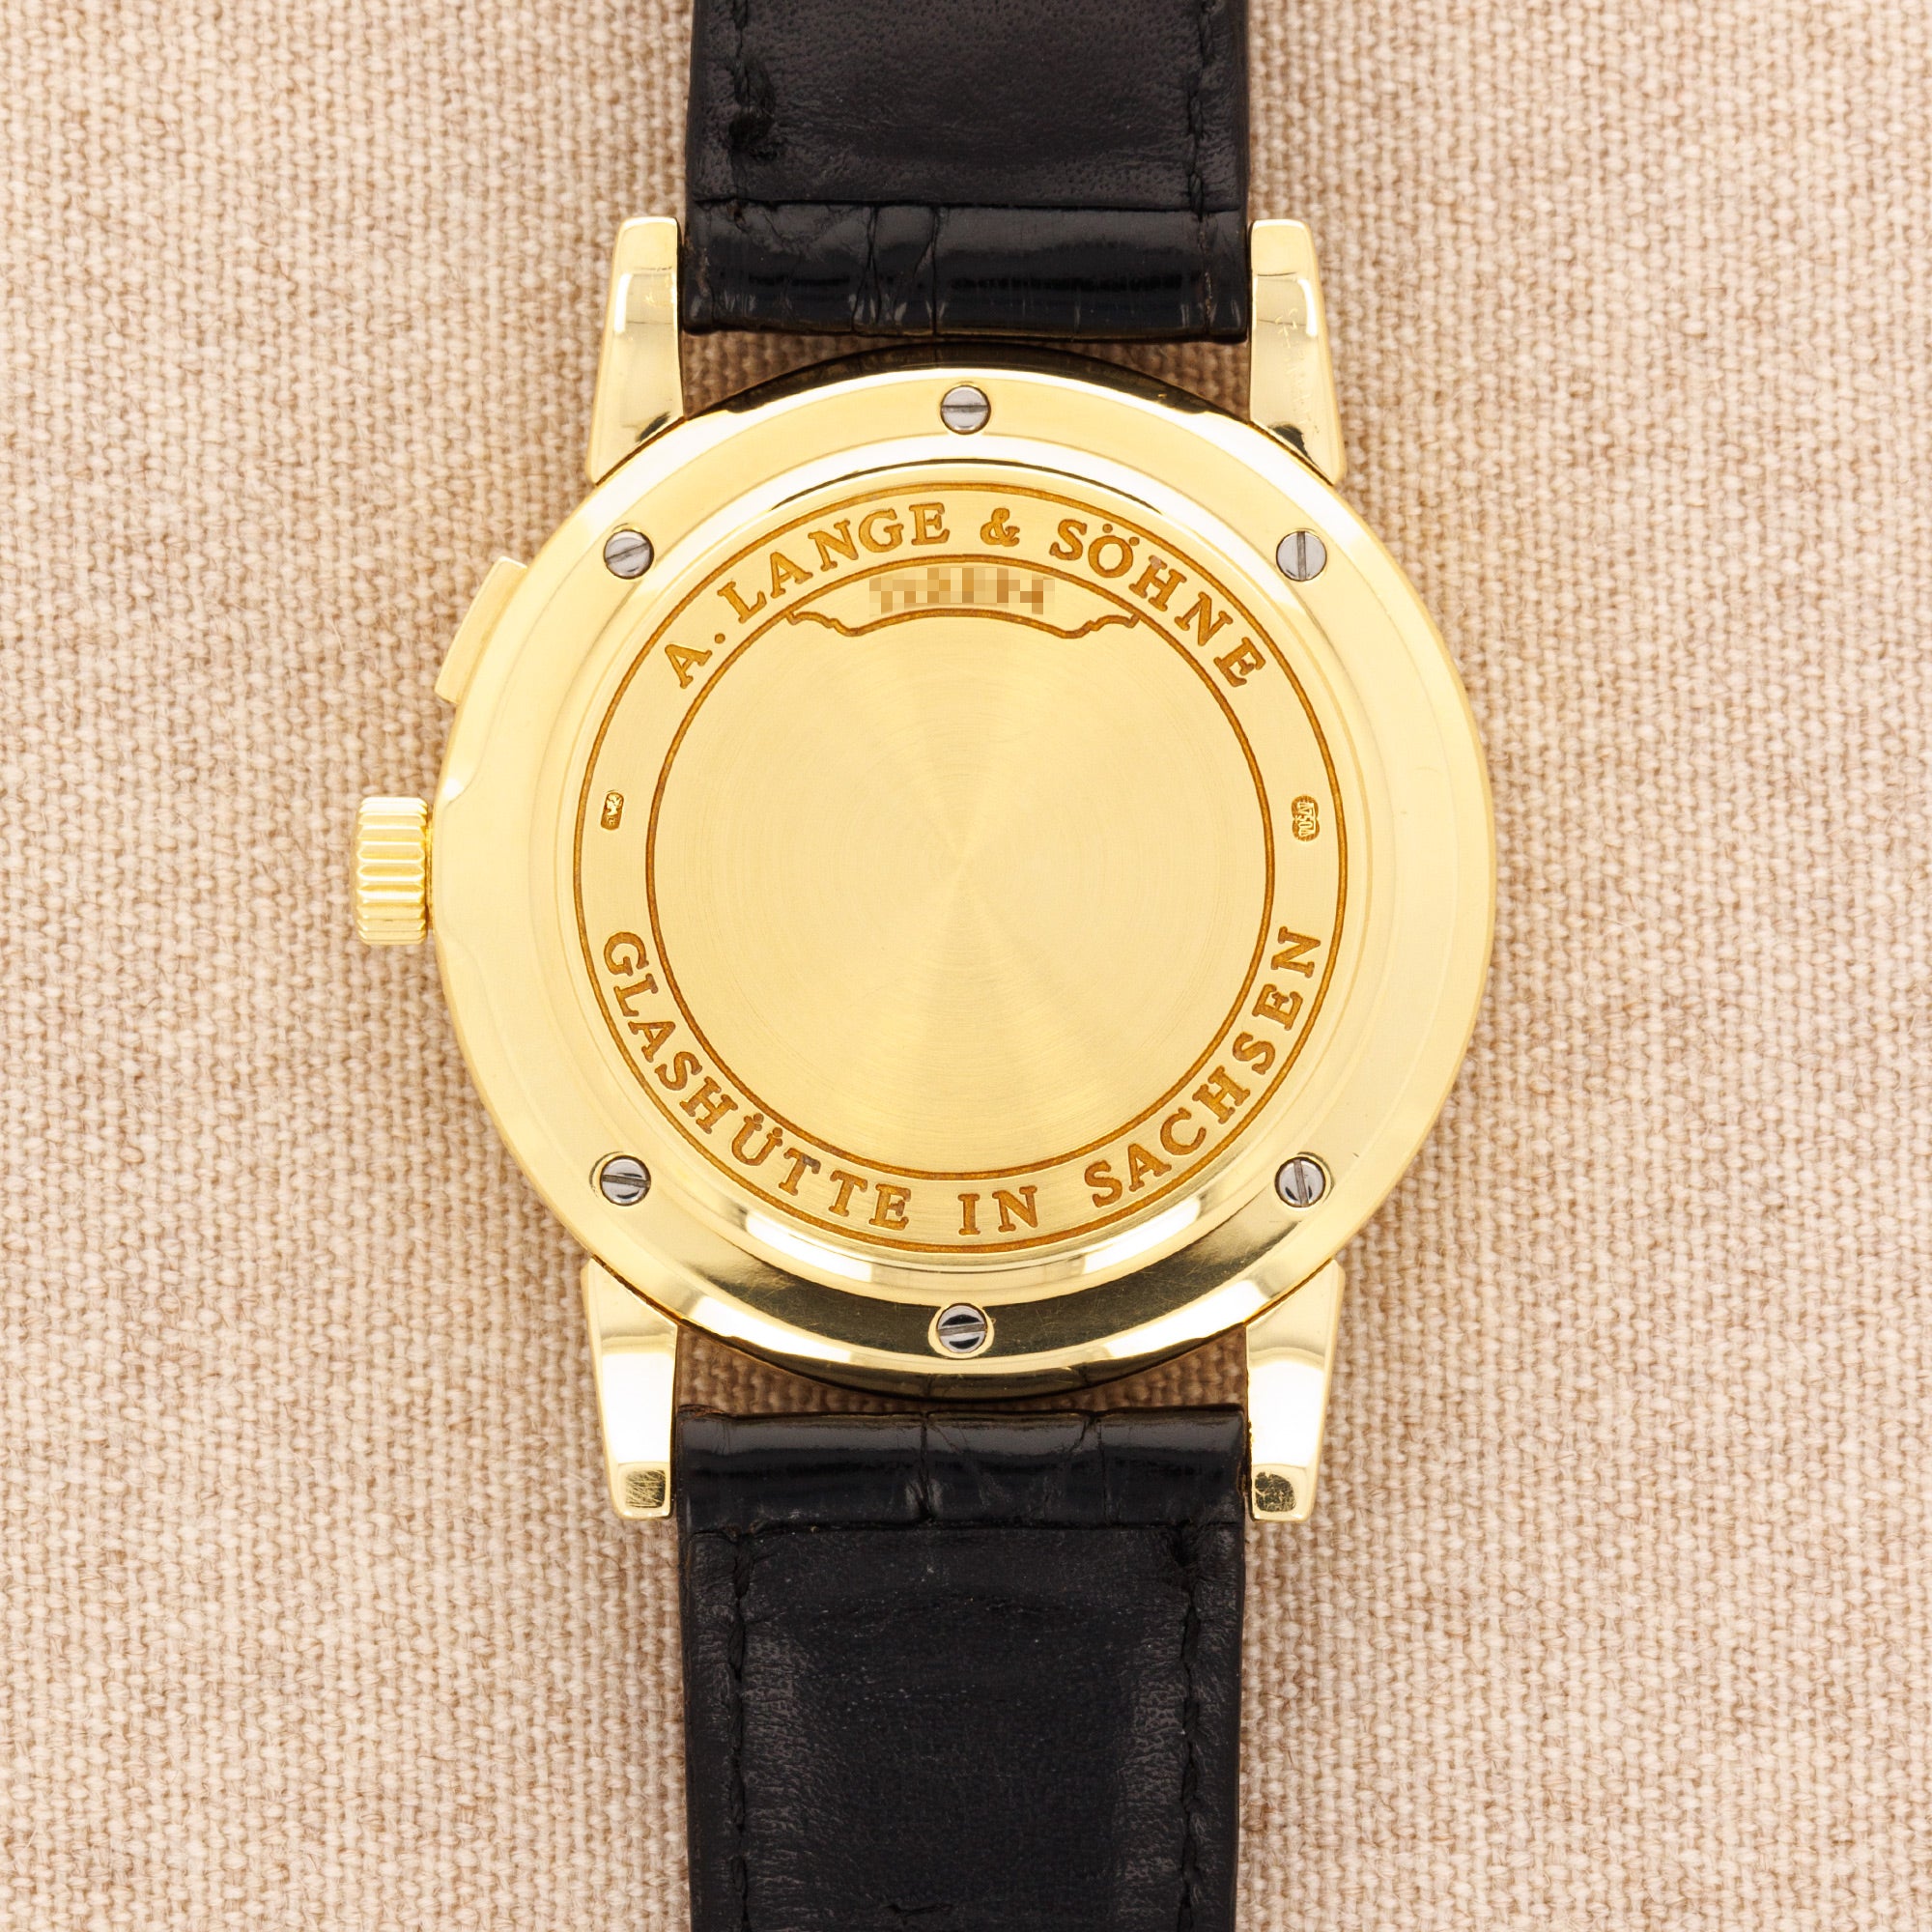 A. Lange & Sohne - A. Lange & Sohne Yellow Gold Saxonia 1st Series Solid Back Watch Ref. 102.002 - The Keystone Watches